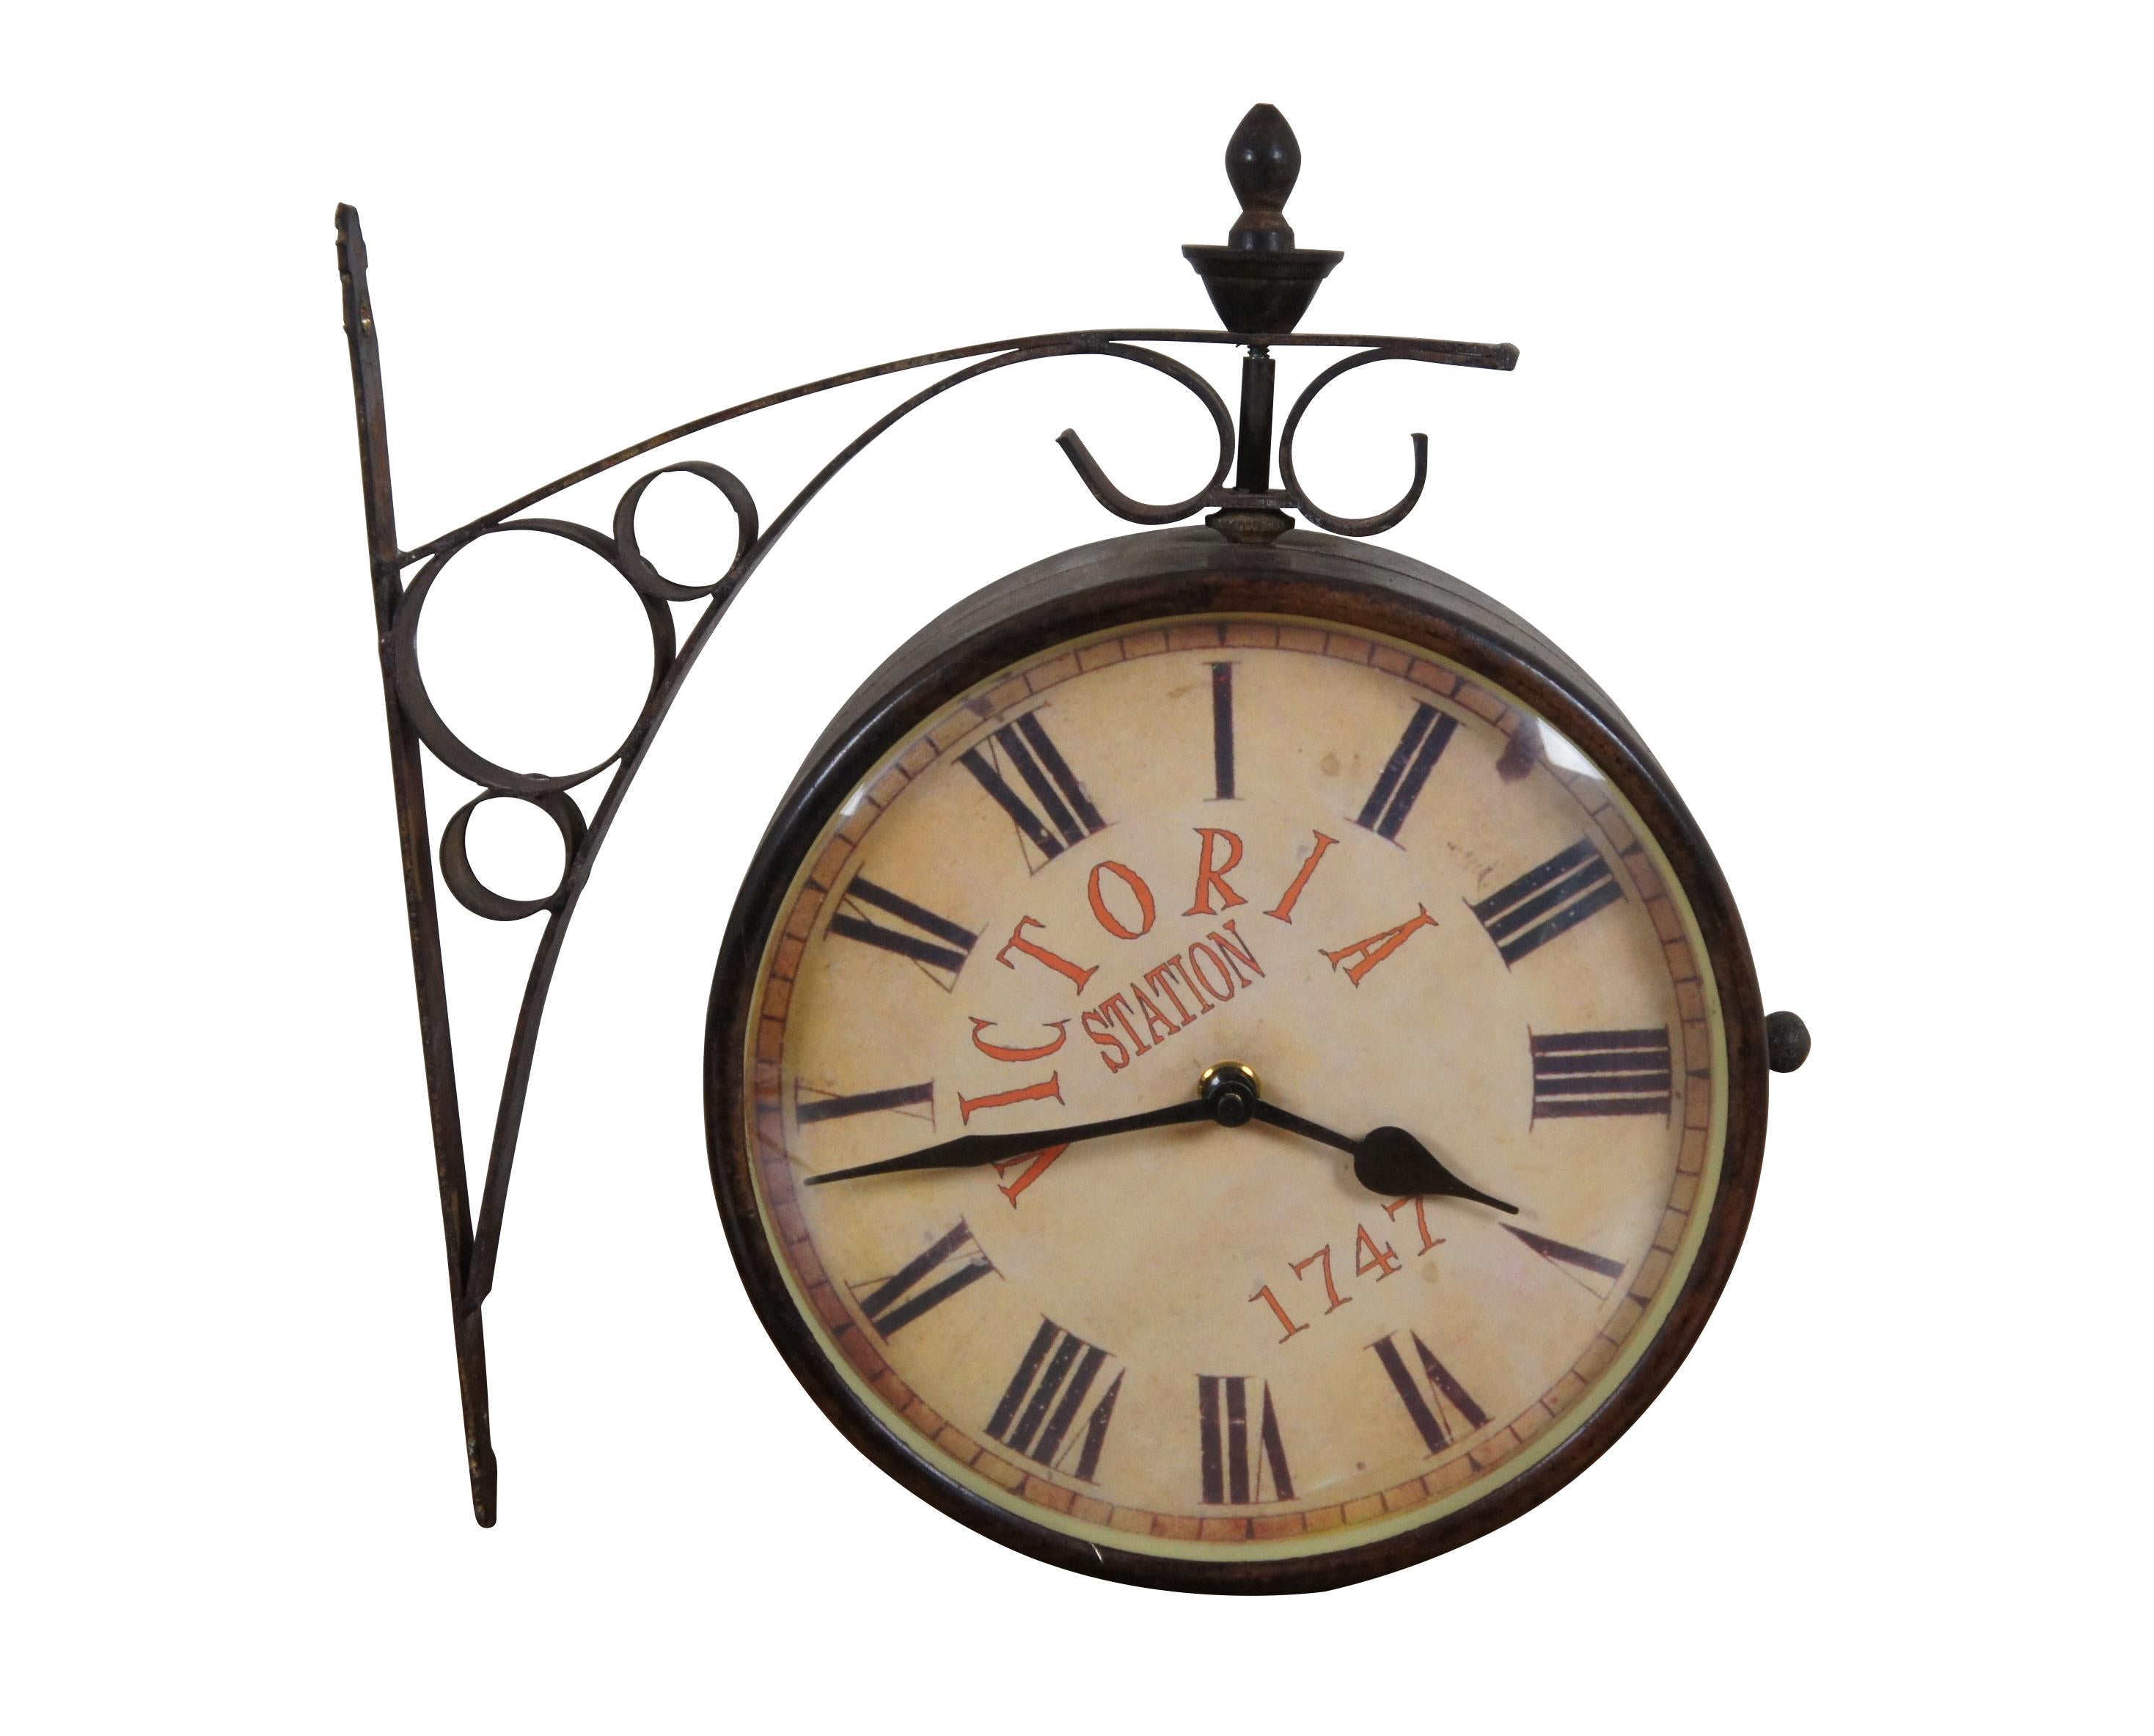 Late 20th century double sided railway clock styled after the famous clock at Victoria Station, London. Wrought metal wall mounted support and case in a dark bronze finish. 8 inch diameter printed face with faux distressing, Roman numerals, and the